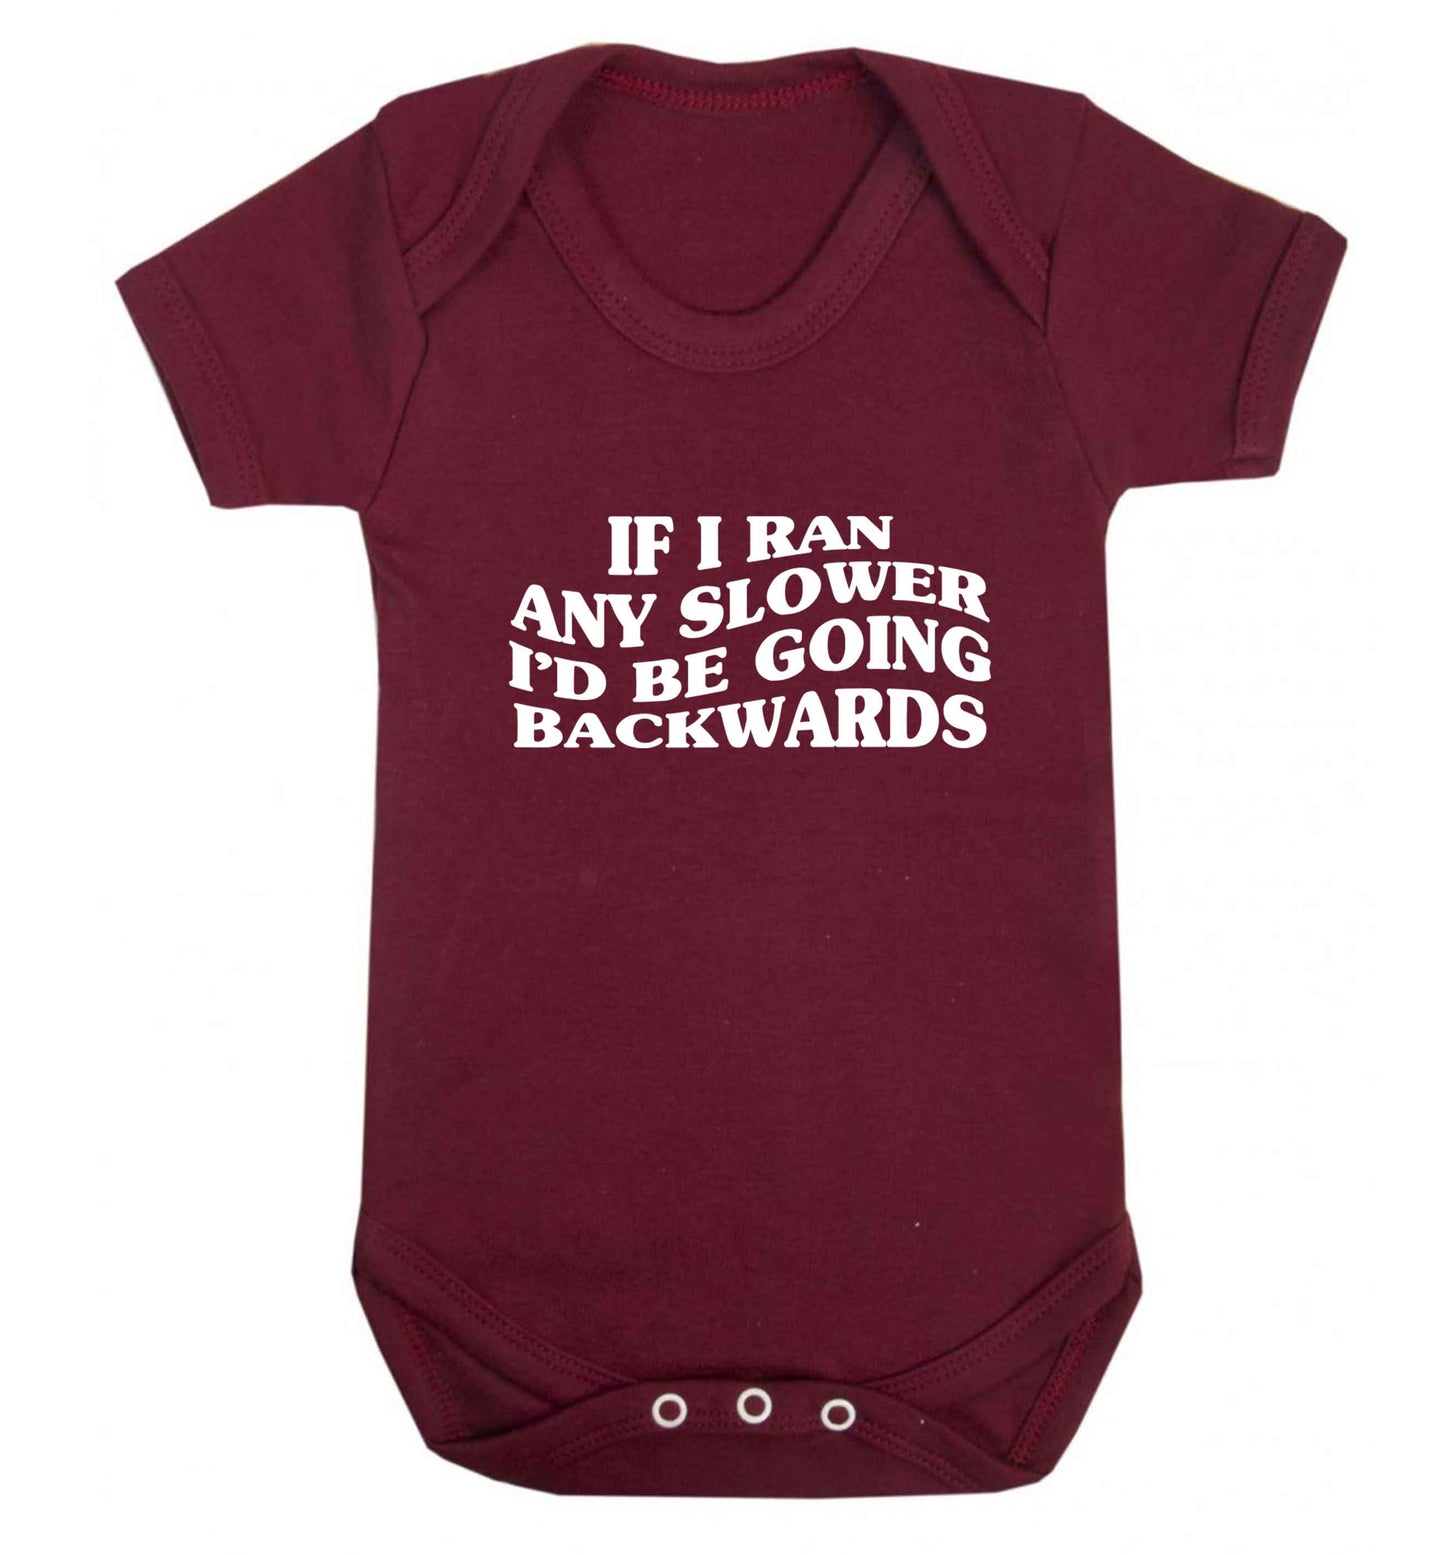 If I ran any slower I'd be going backwards baby vest maroon 18-24 months